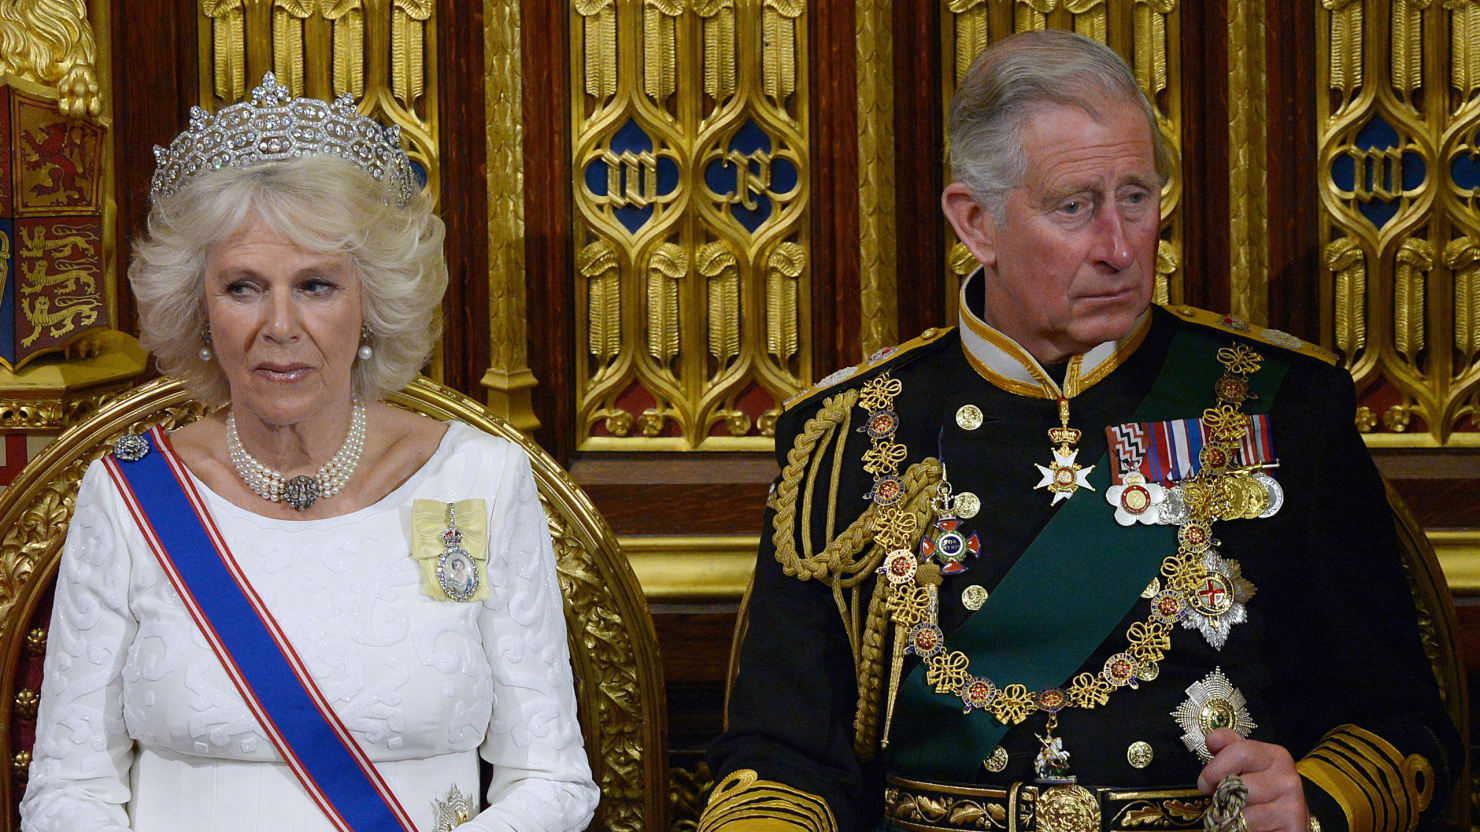 Prince Charles Prince Charles celebrates 50 years since investiture